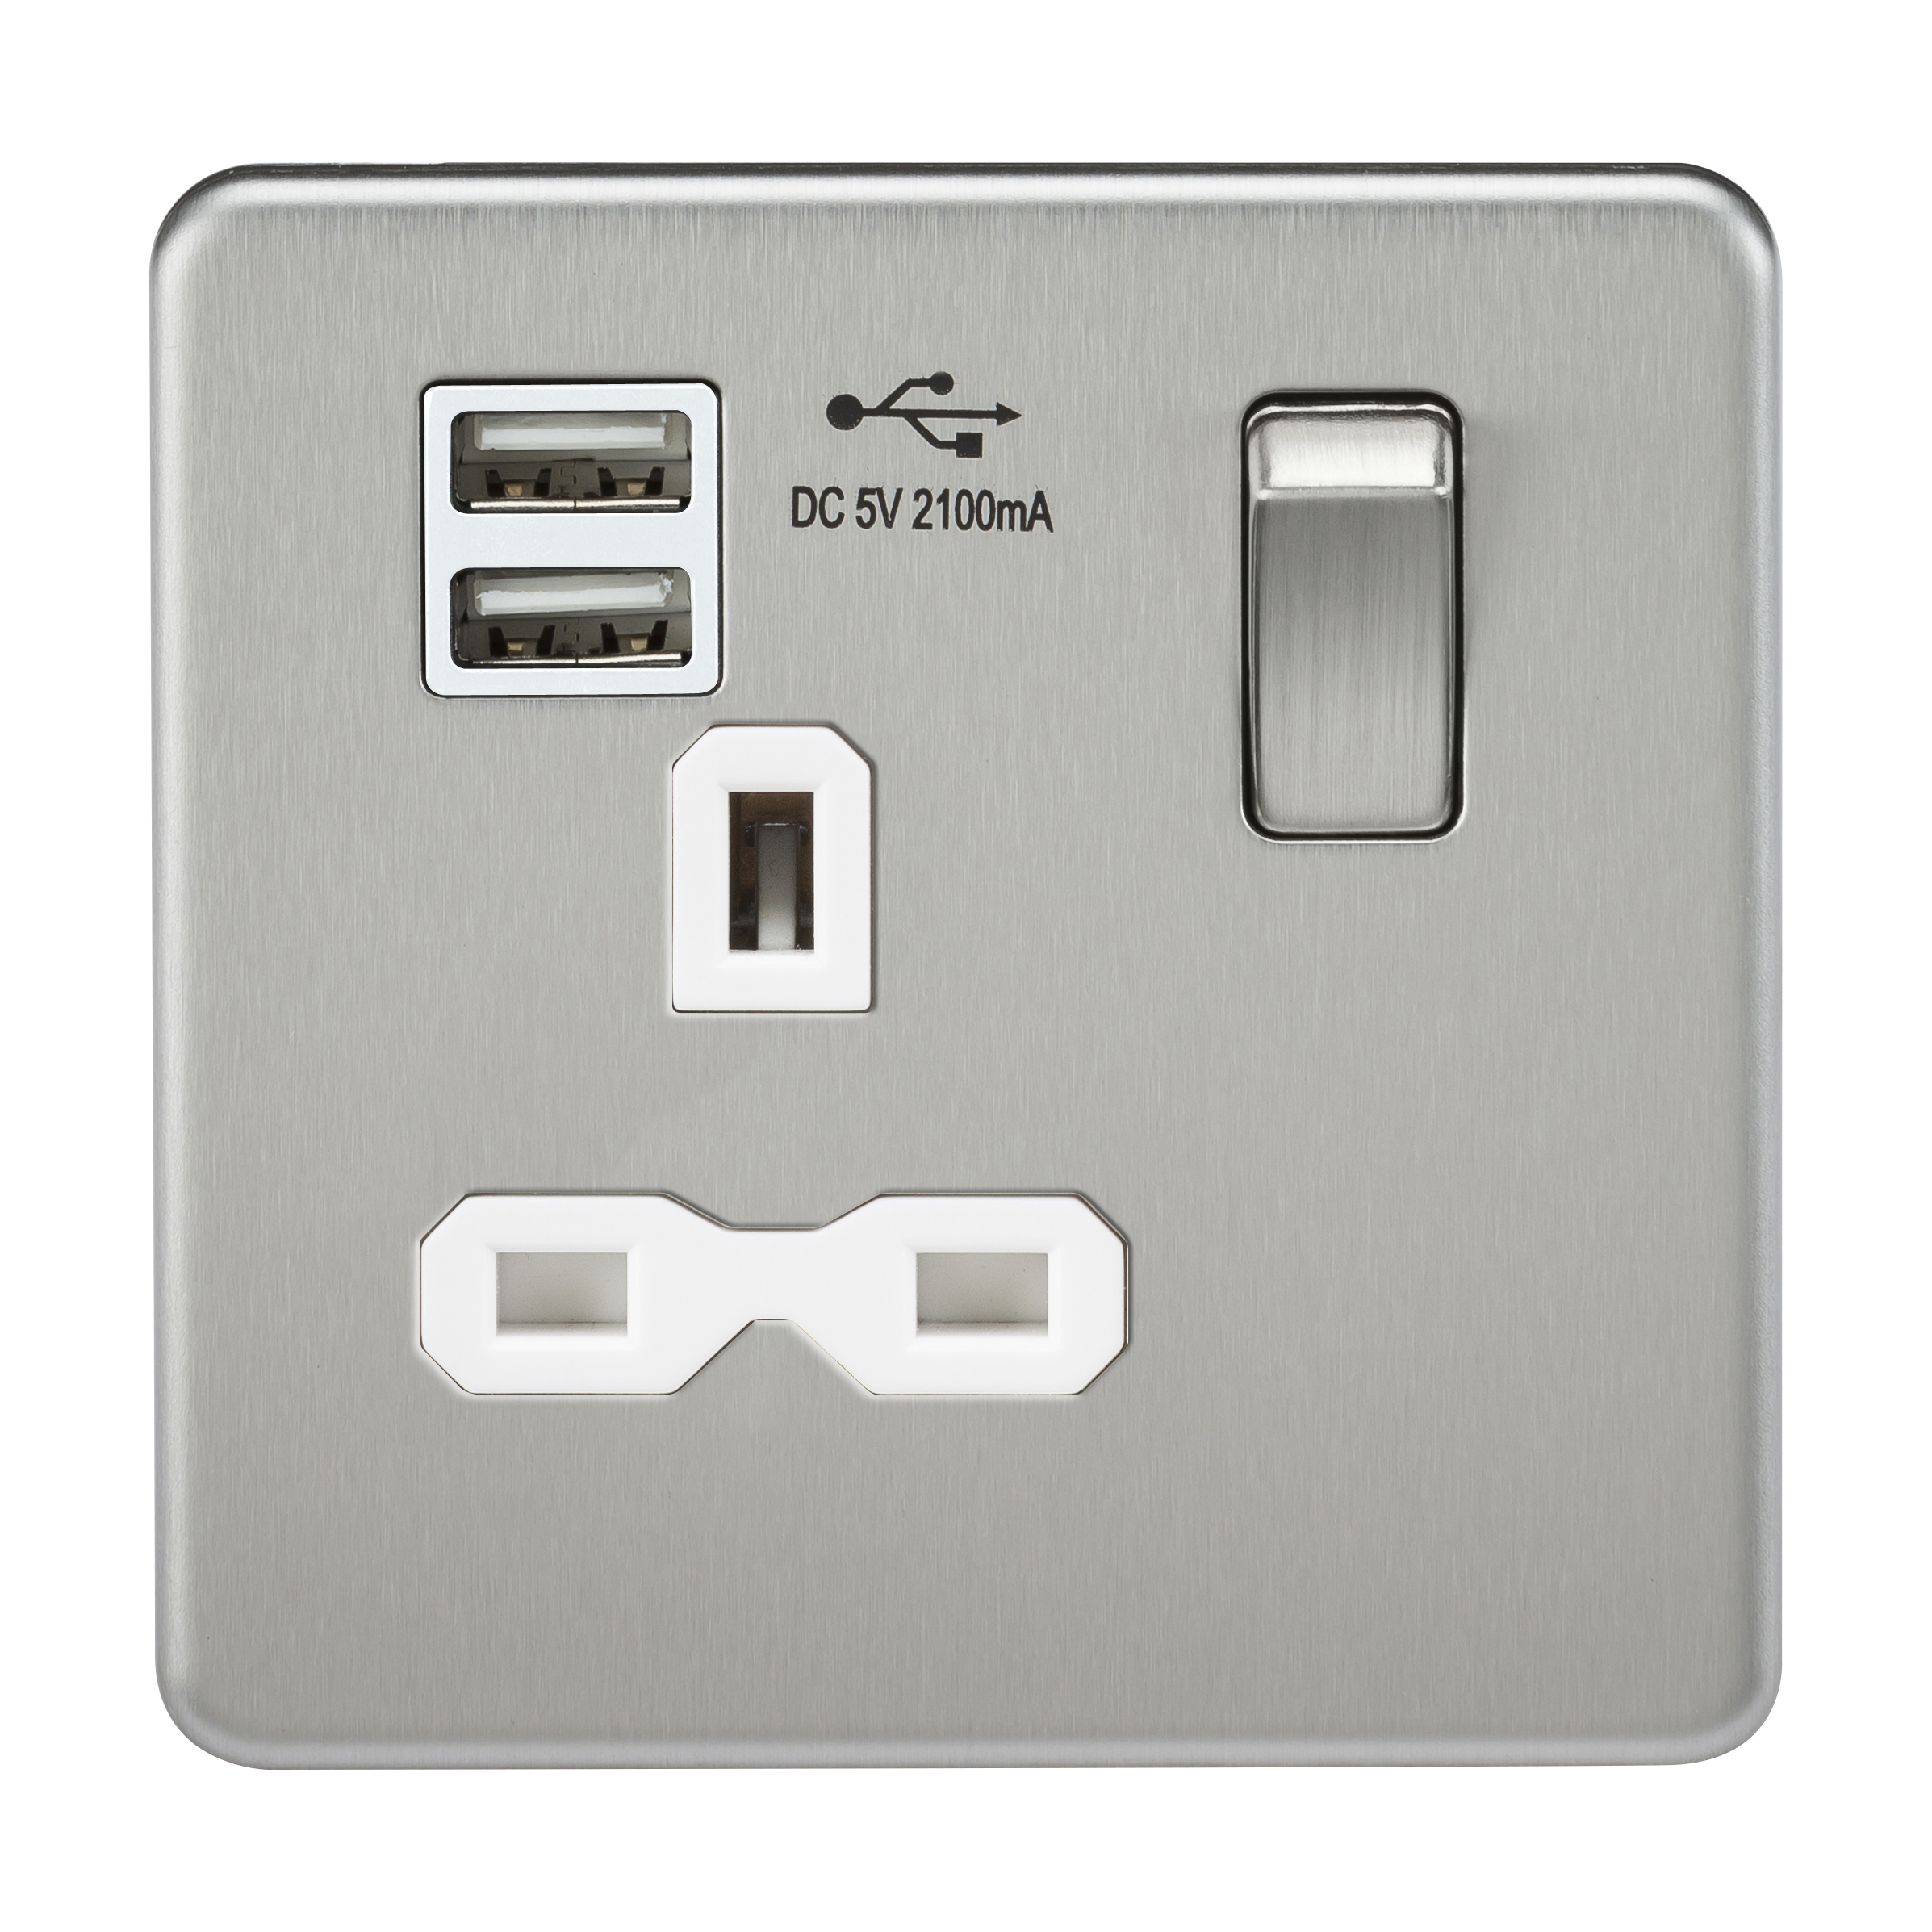 Screwless 13A 1G Switched Socket With Dual USB Charger (2.1A) - Brushed Chrome With White Insert - SFR9901BCW 